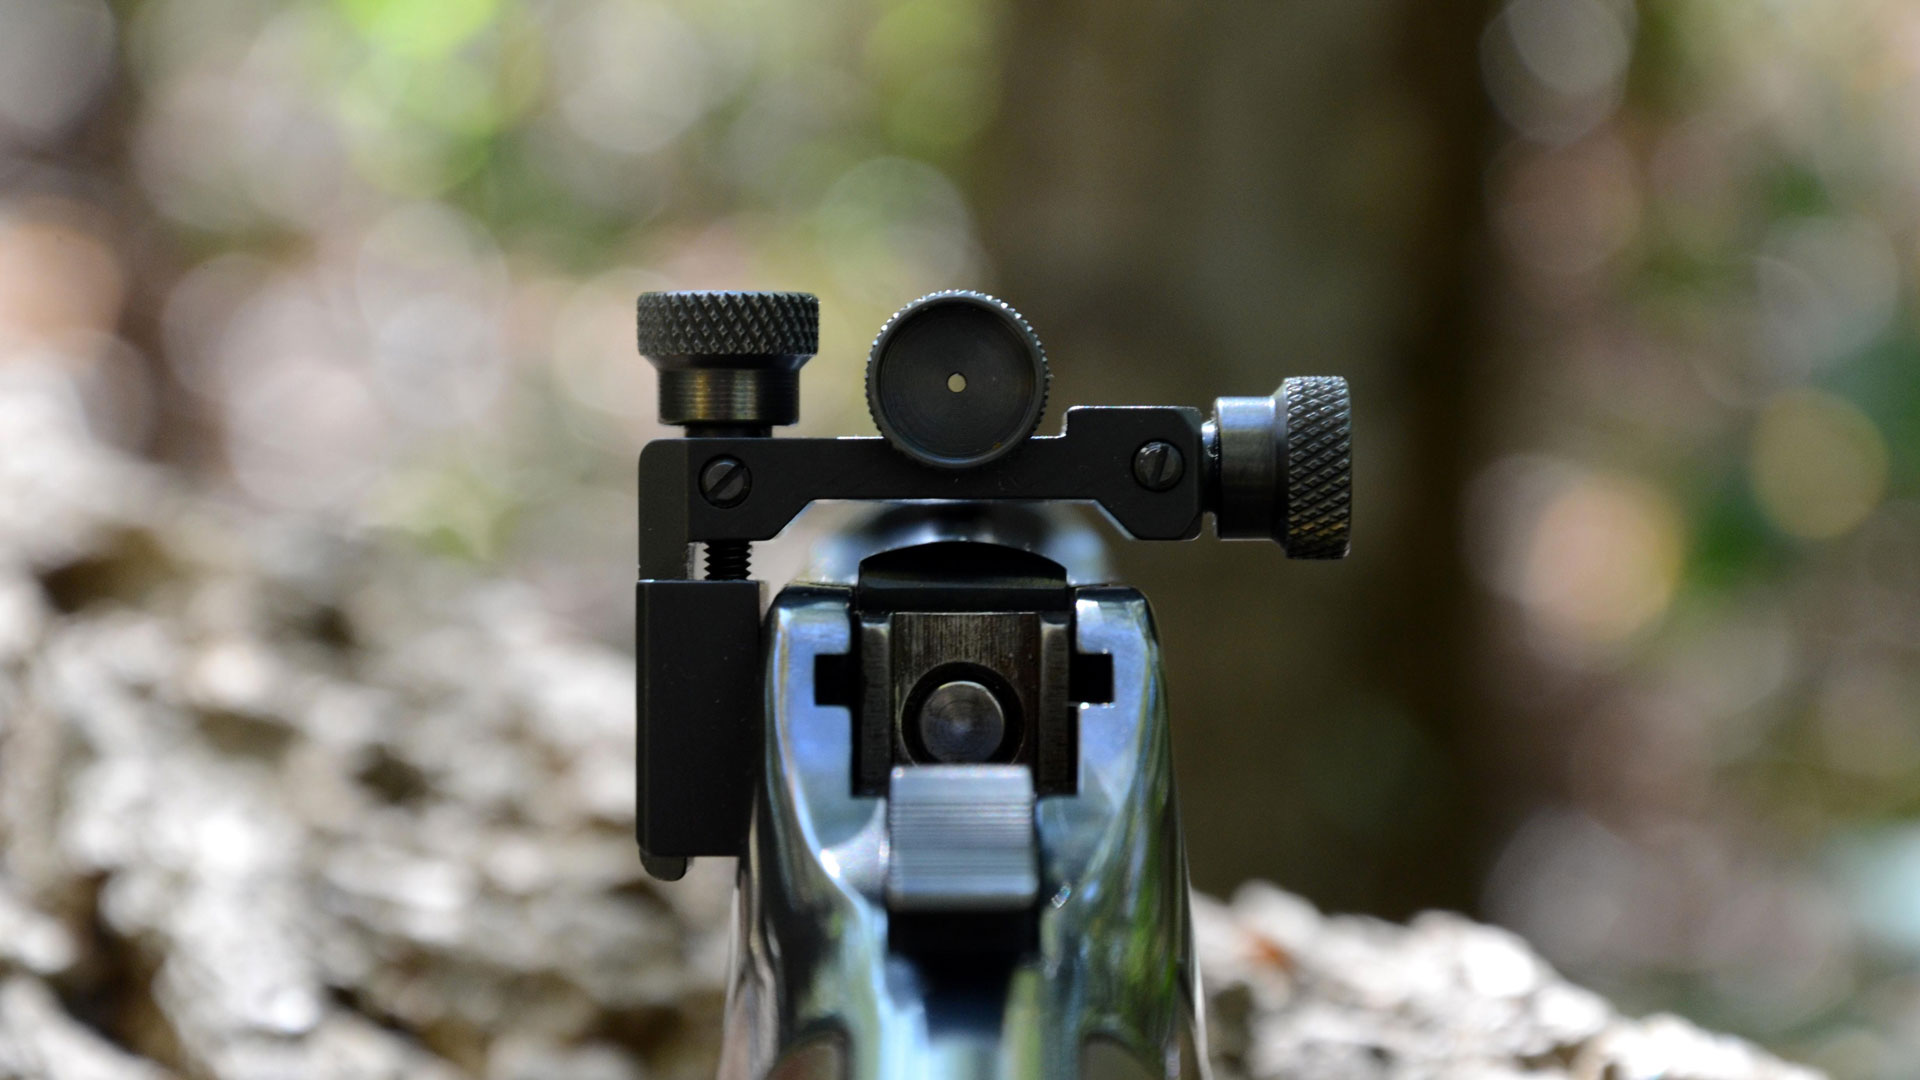 Get This Report on Bullseye! - How To Sight In A Riflescope